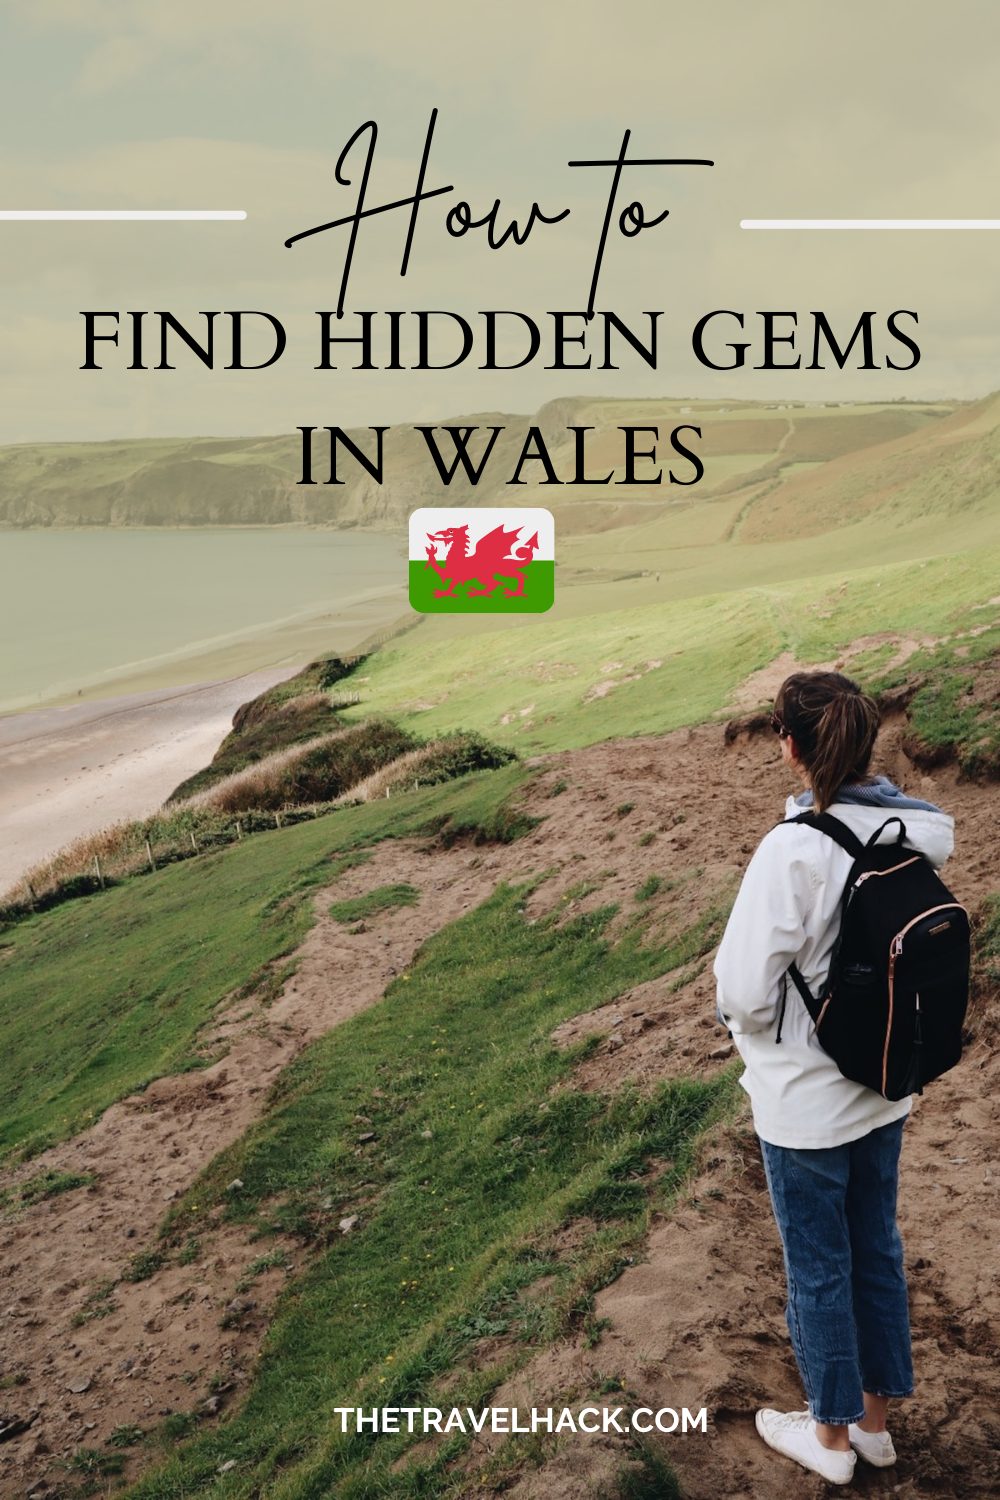 Tips for finding hidden gems in Wales